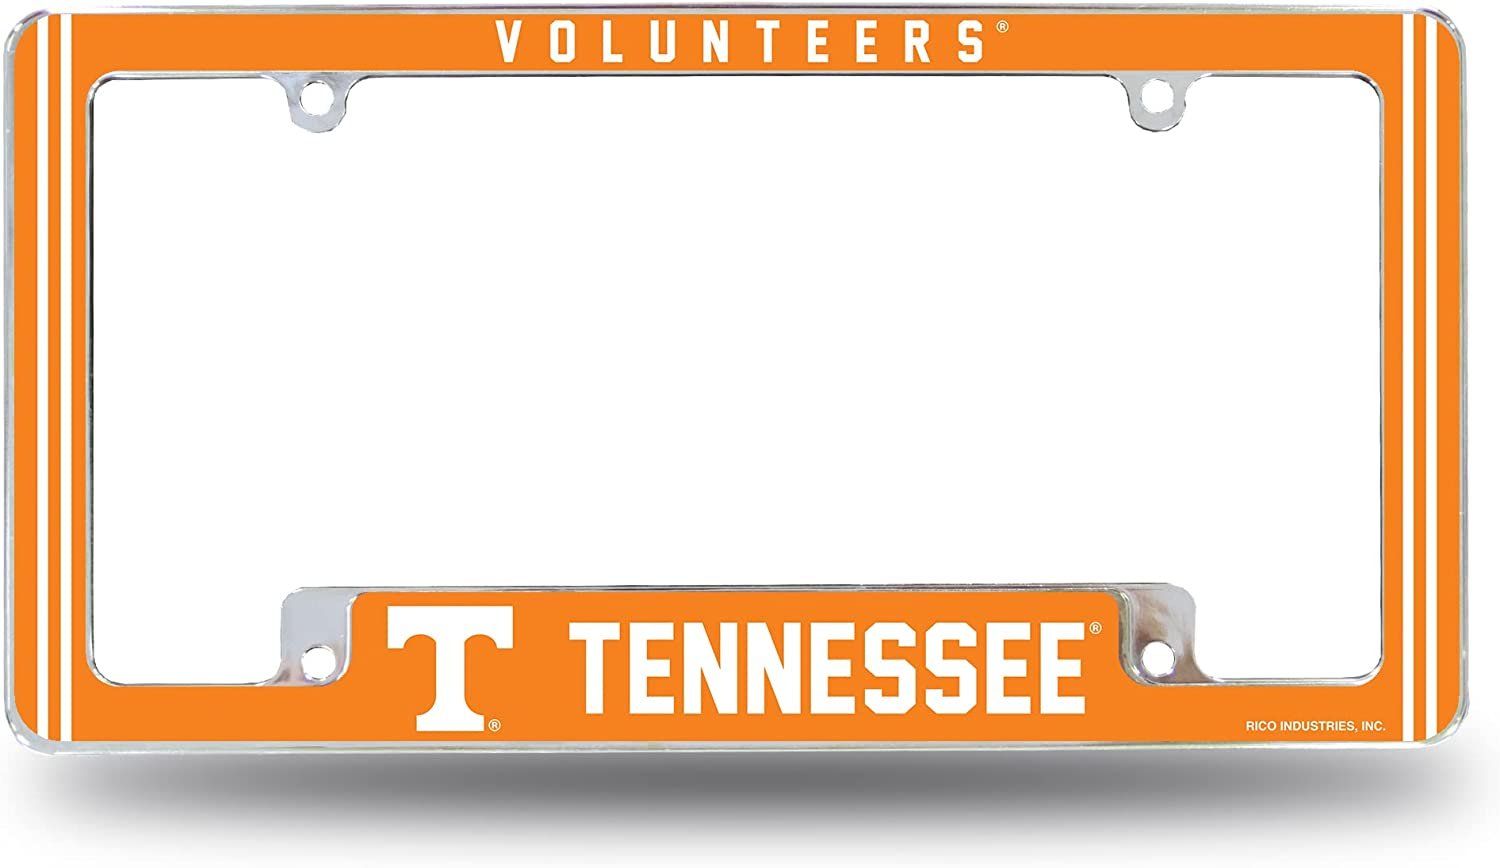 University of Tennessee Volunteers Metal License Plate Frame Chrome Tag Cover 12x6 Inch Alternate Design